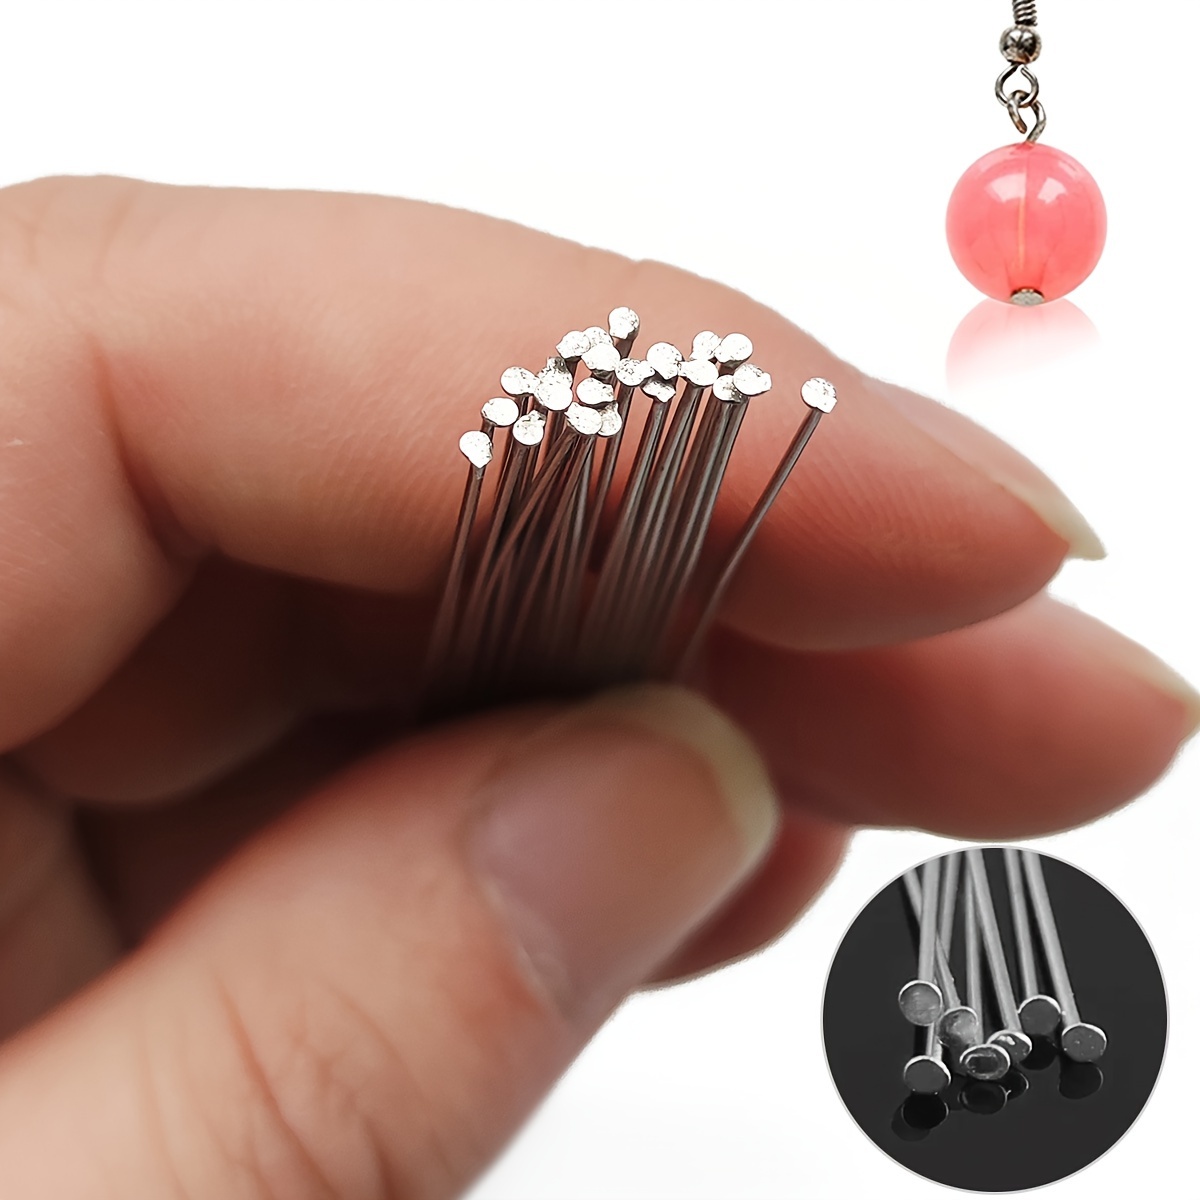 100Pcs Flat Head Pins For Jewelry Making, Stainless Steel Flat Head Pins  Jewelry Head Pins For Diy Earring Bracelet Necklace Craft